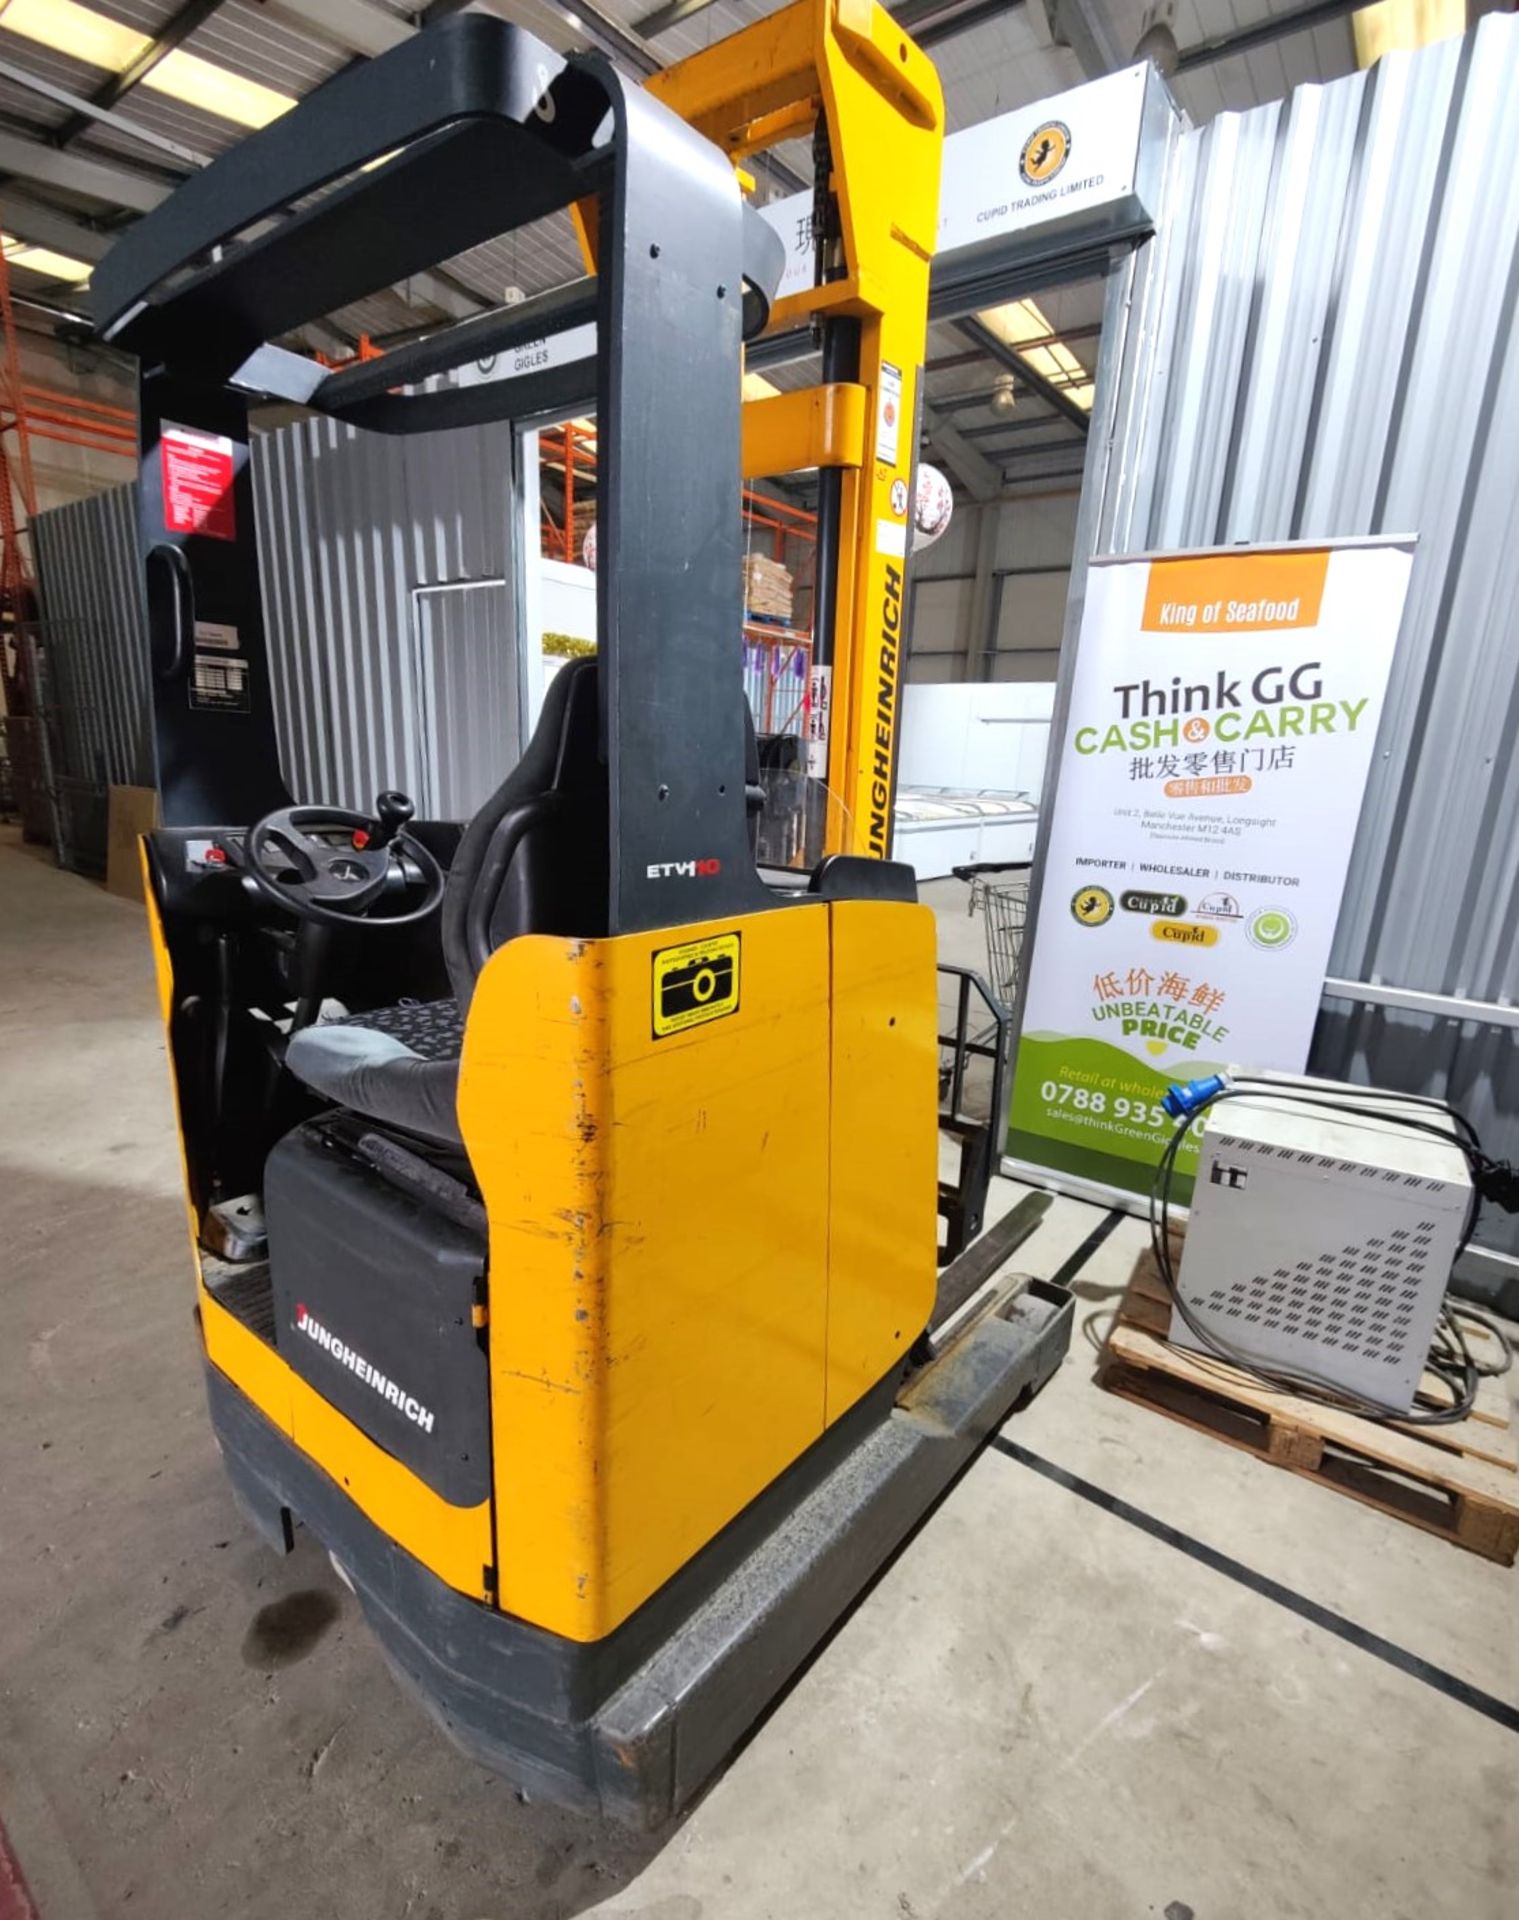 1 x Jungheinrich Electric Forklift Reach Truck - 1 Ton Capacity - 5900mm Lift Height - Image 6 of 36